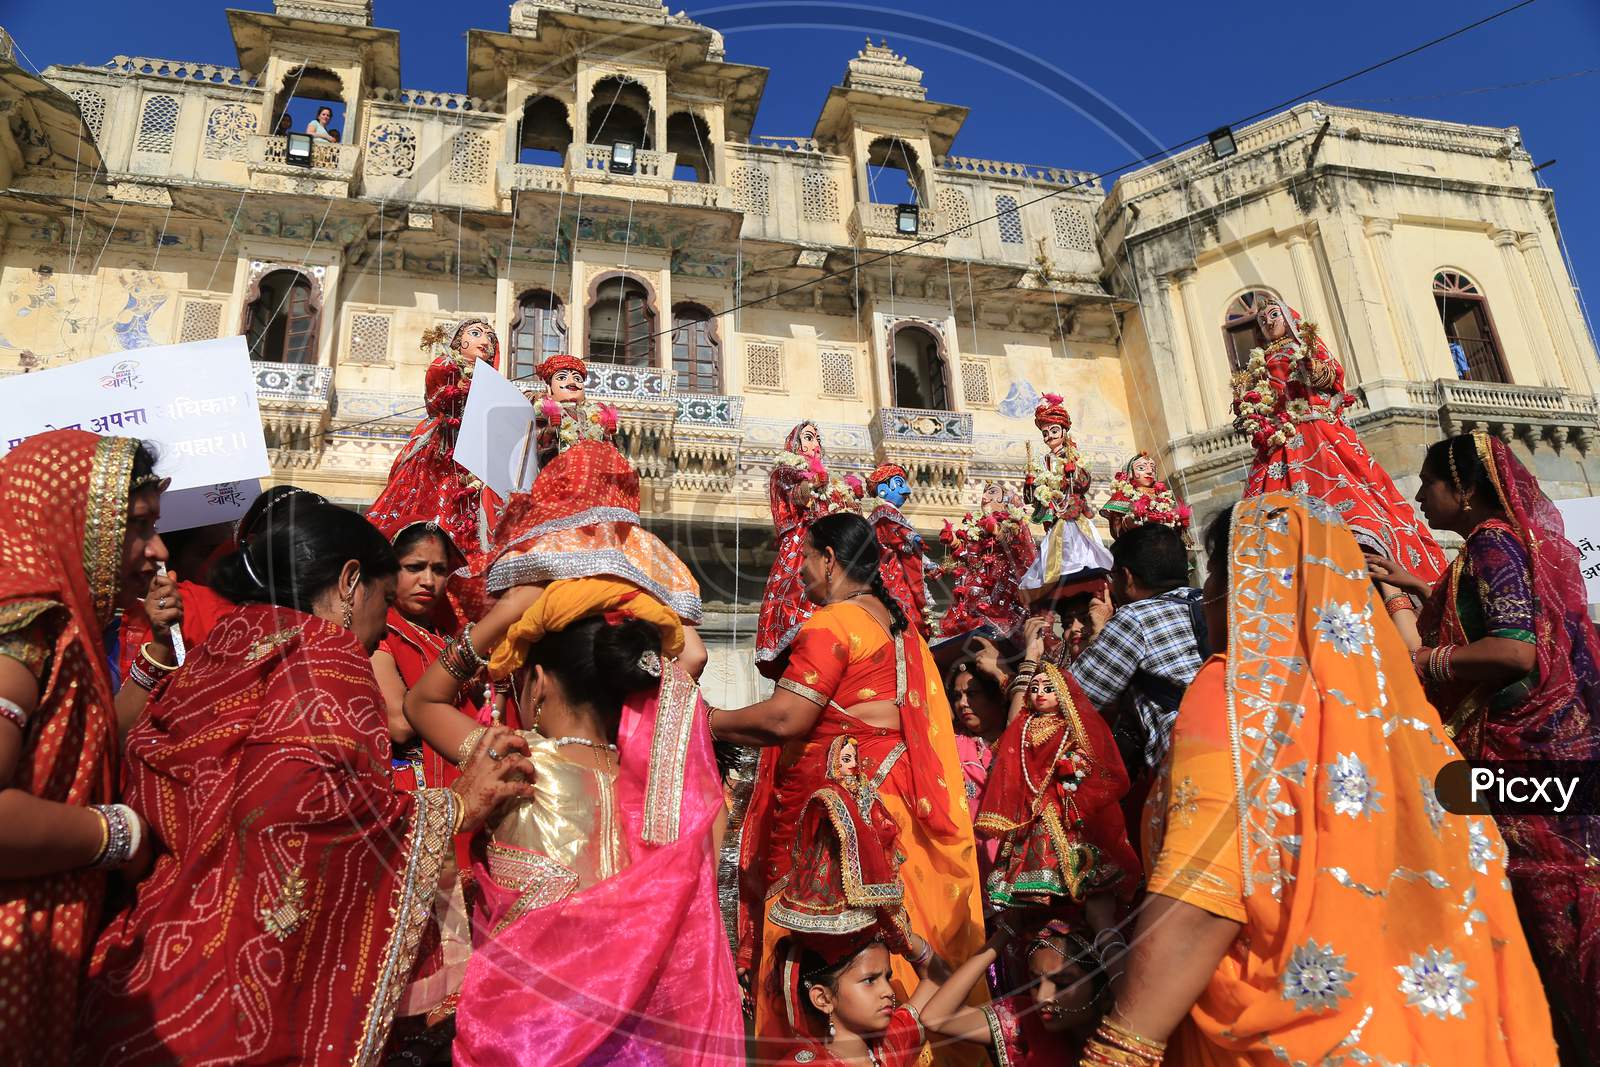 Indian married women take part in the Gangaur festival in Udaipur, in Rajasthan state, on April 8, 2019. During the Gangaur festival, married women worship the Hindu goddess Gauri, consort of the deity Shiva.